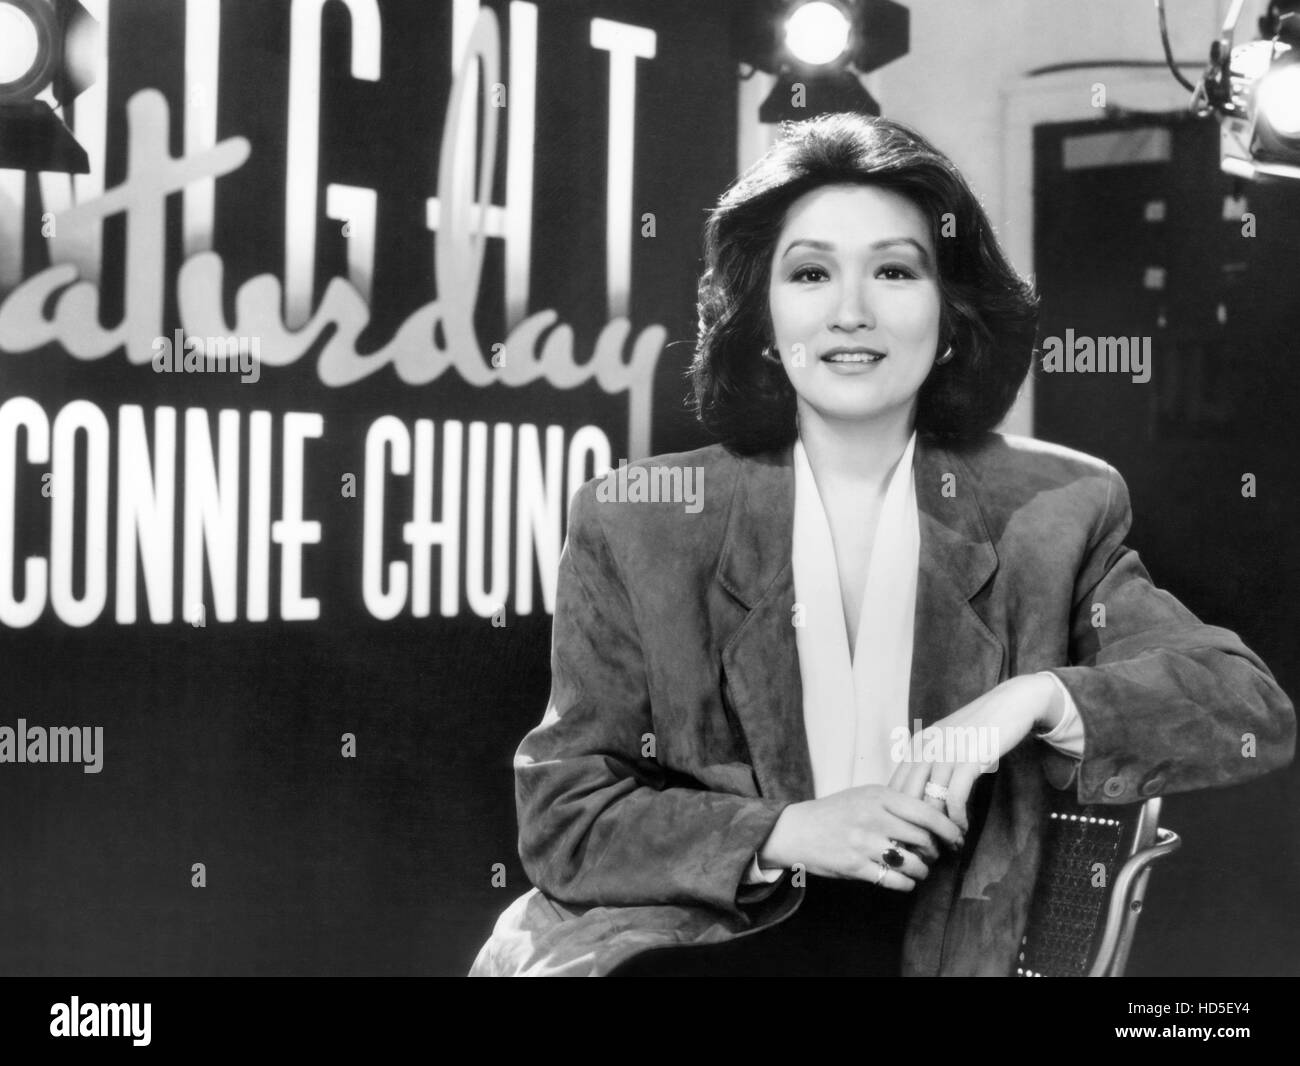 SATURDAY NIGHT WITH CONNIE CHUNG, host Connie Chung, 1989. © CBS / Courtesy: Everett Collection Stock Photo